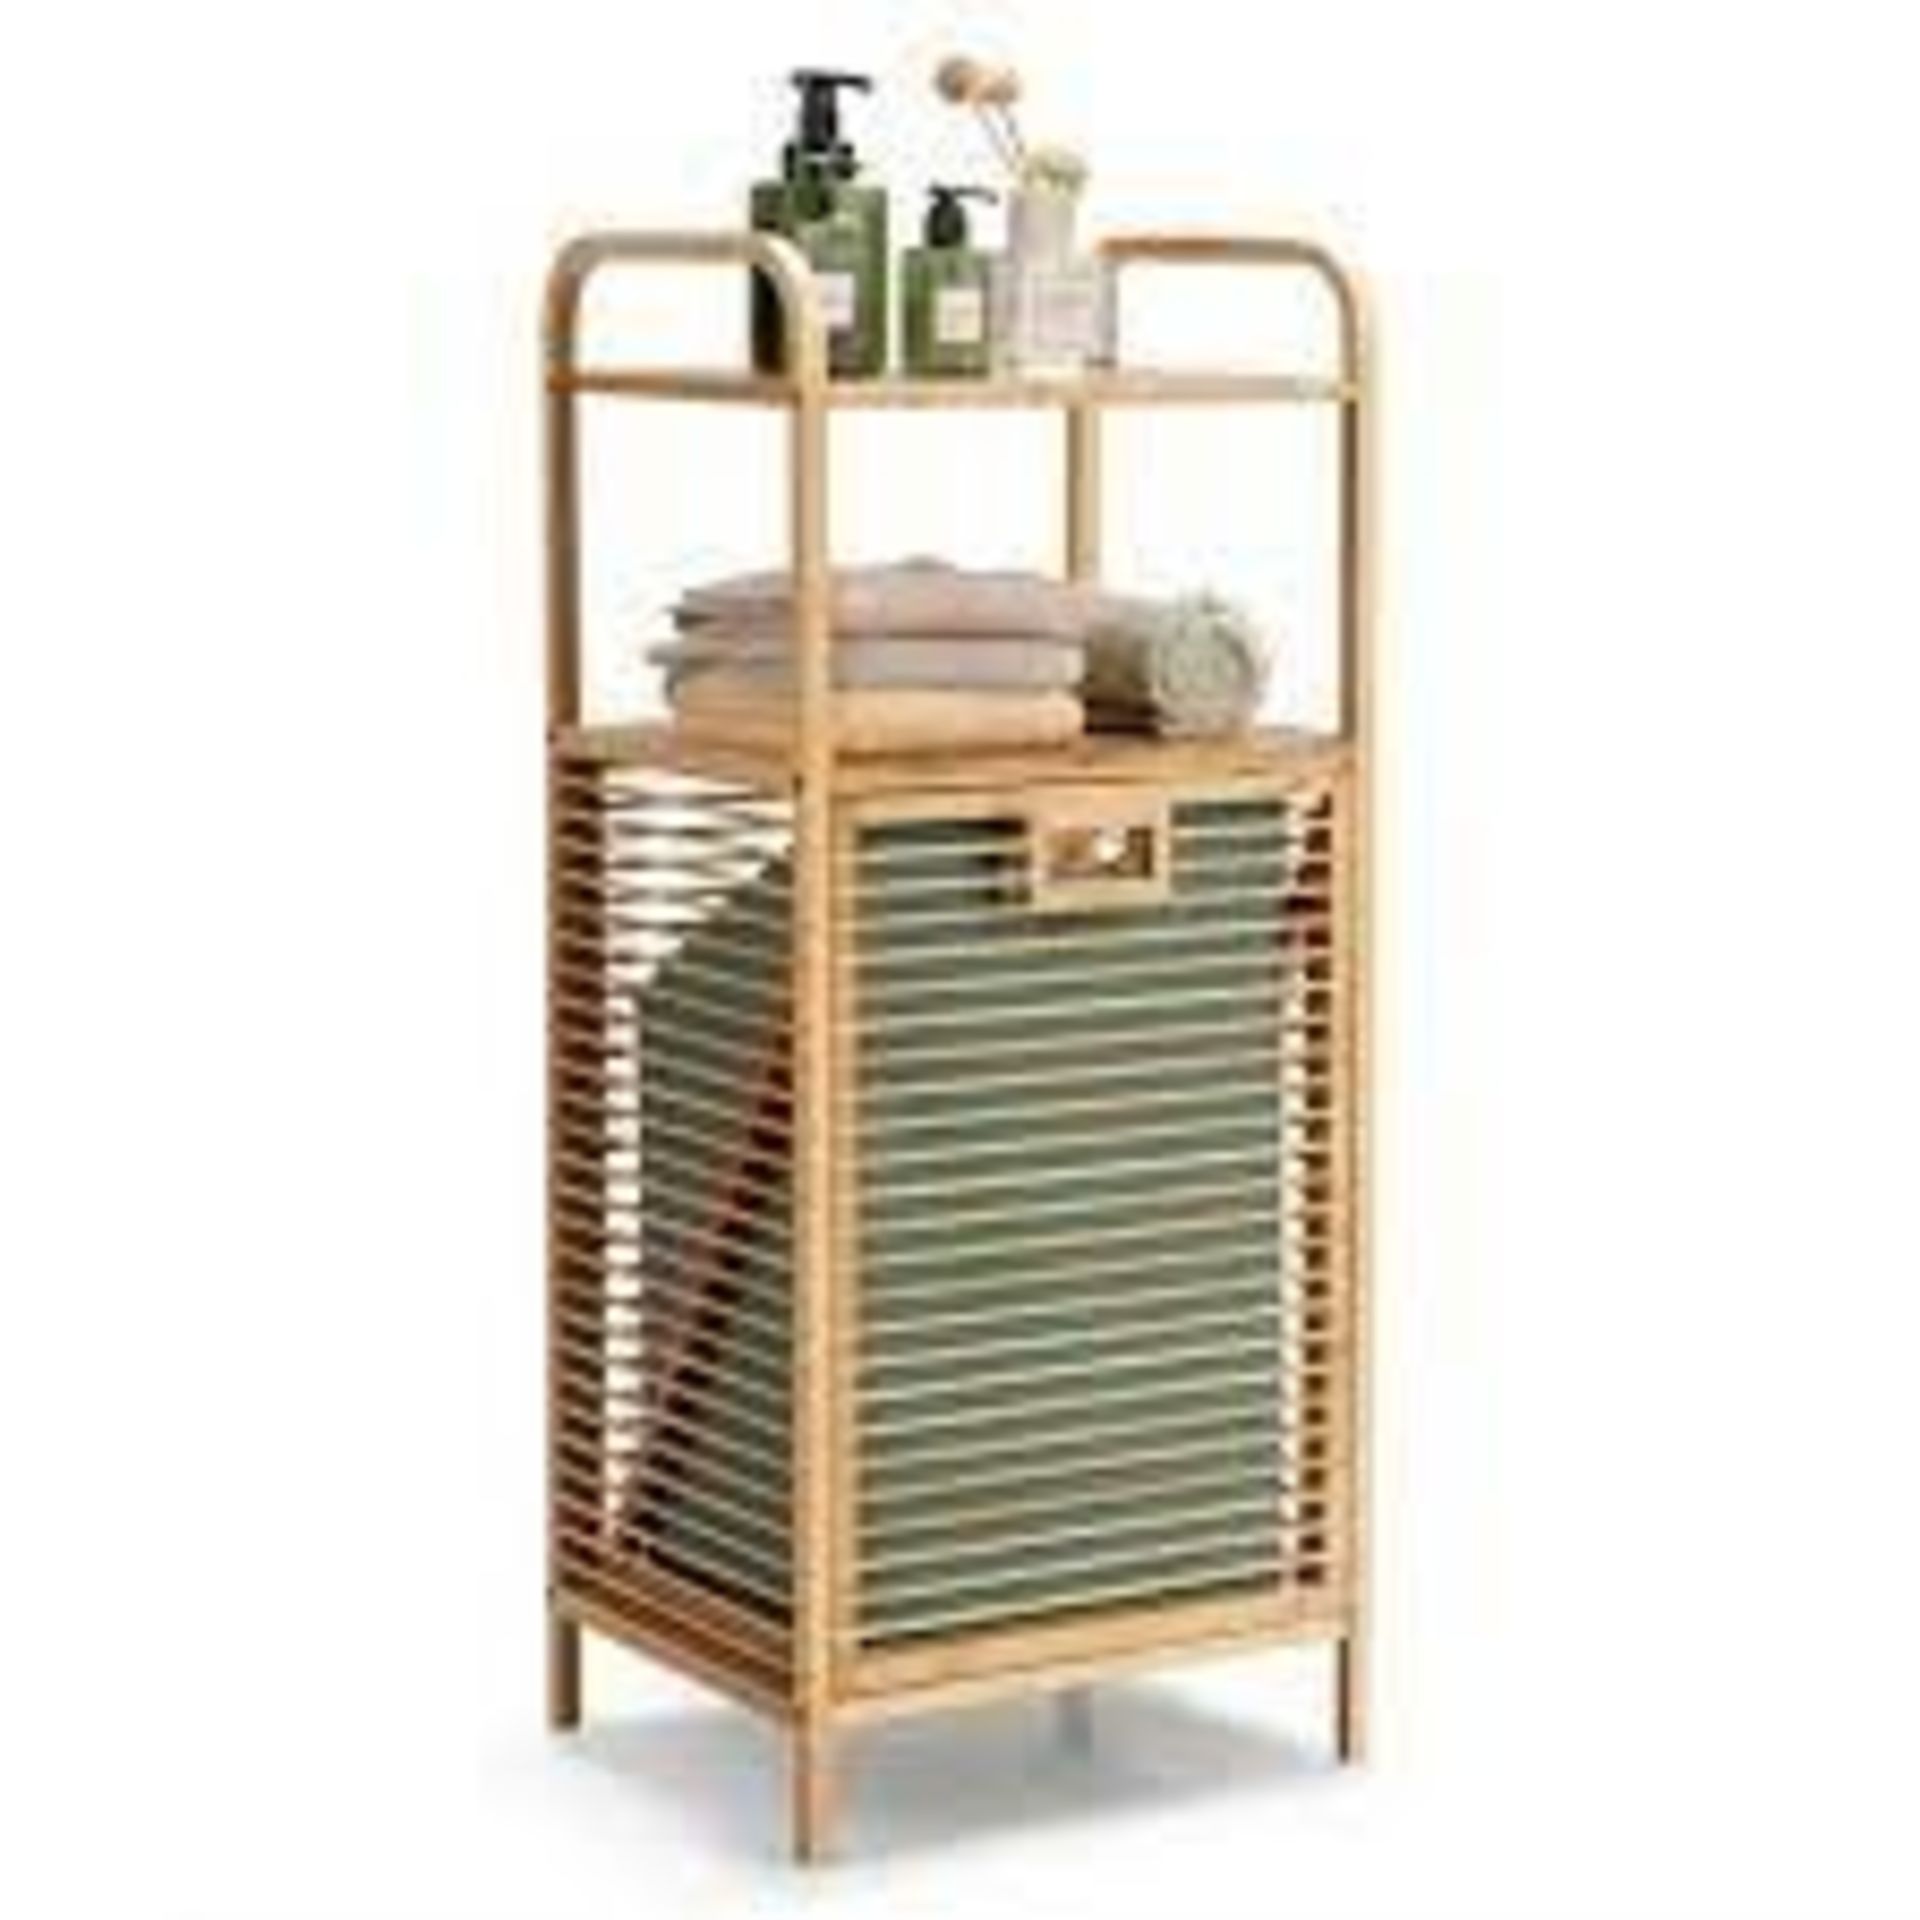 Bamboo Laundry Bin with Storage and Removable Basket. - R14.7.